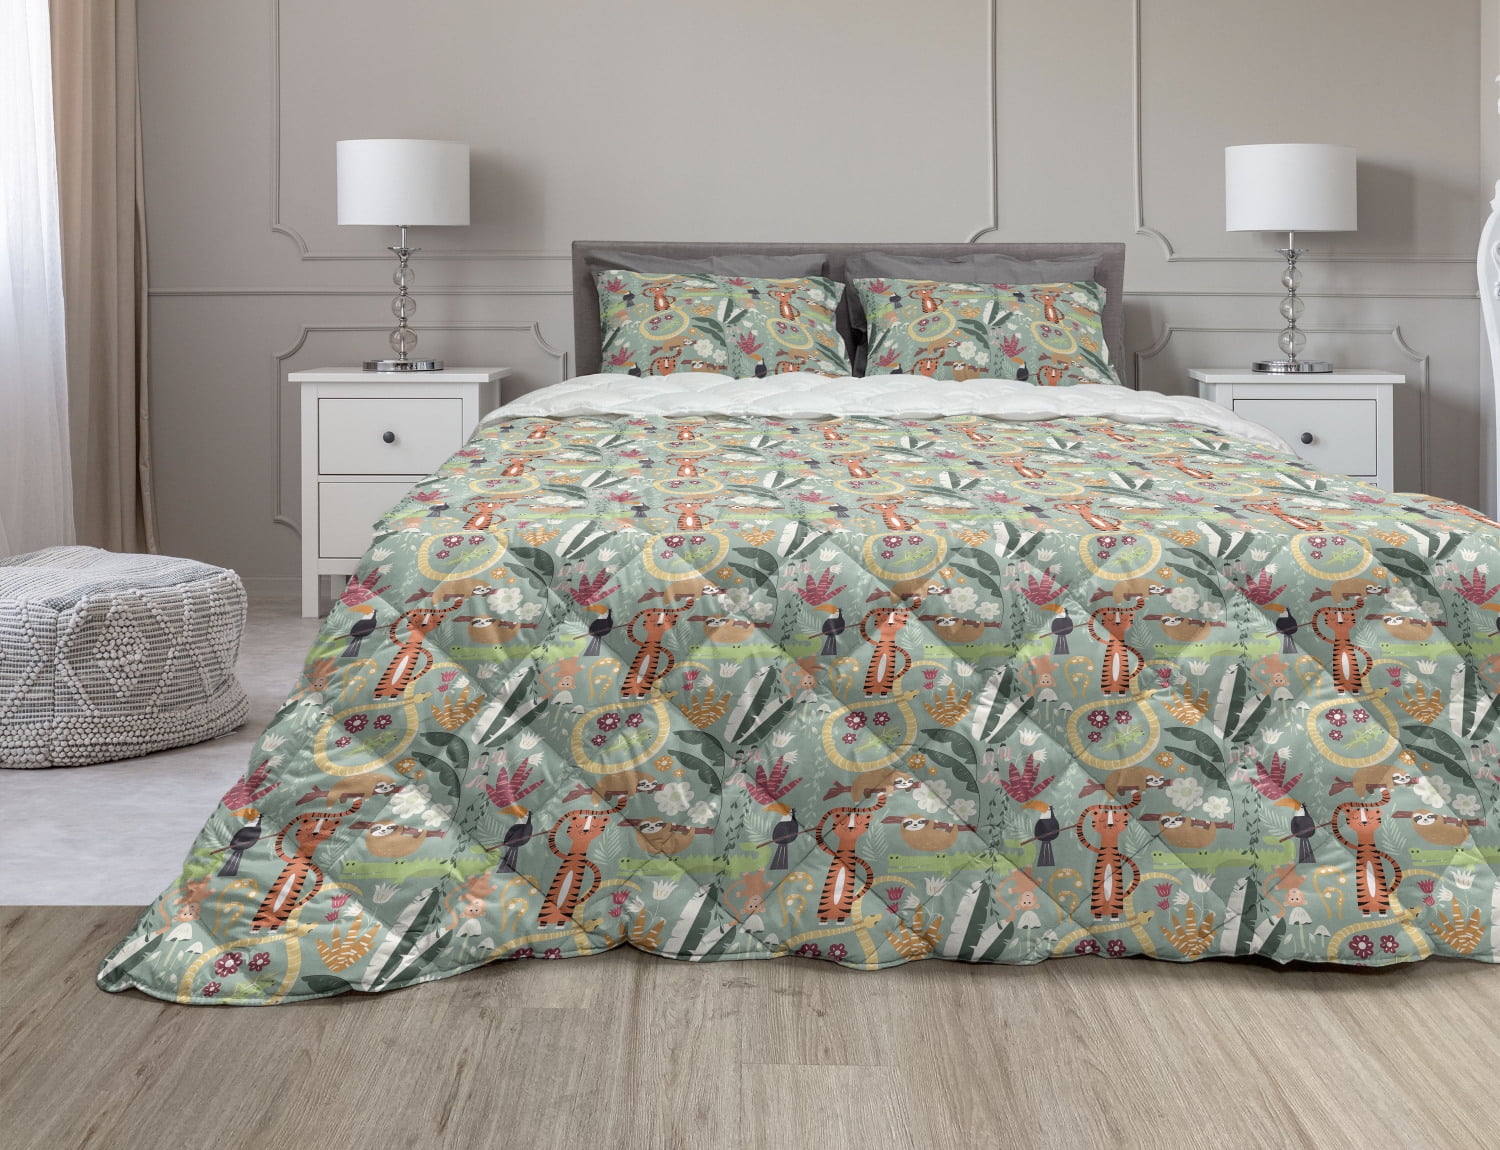 Rapport Sloth Nap All Day Novelty Duvet Cover Bedding Set FREE P&P 